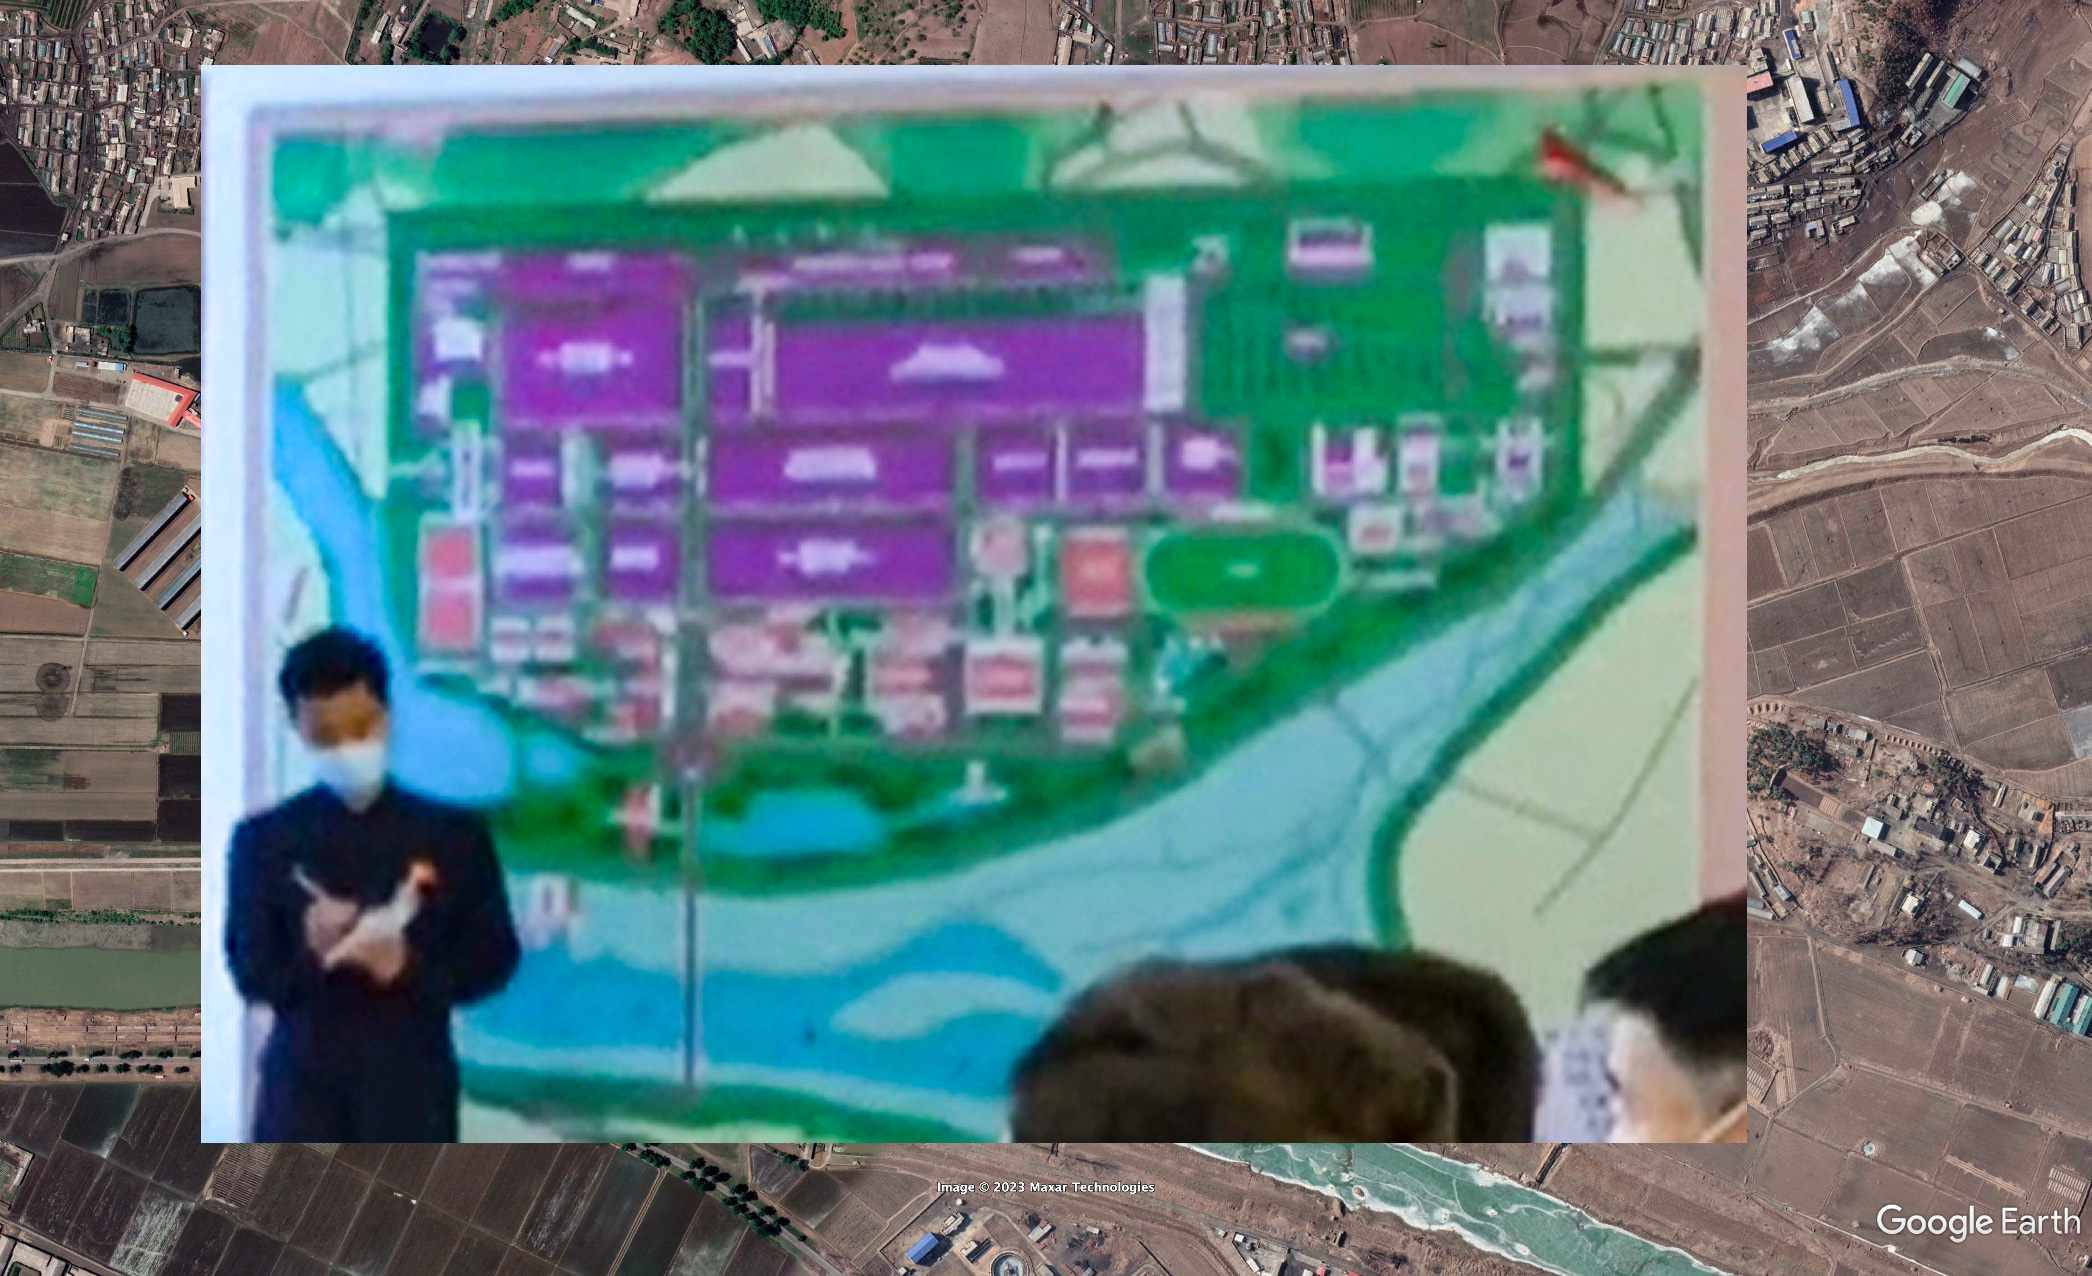 ge-may2021-susan-district-pyongyang-new-kim-jong-thae-electric-locomotive-complex-factory-construction-site-location-compared-kctv-may1-2023-8pm-news-map-plan-design-blueprint-2.jpg